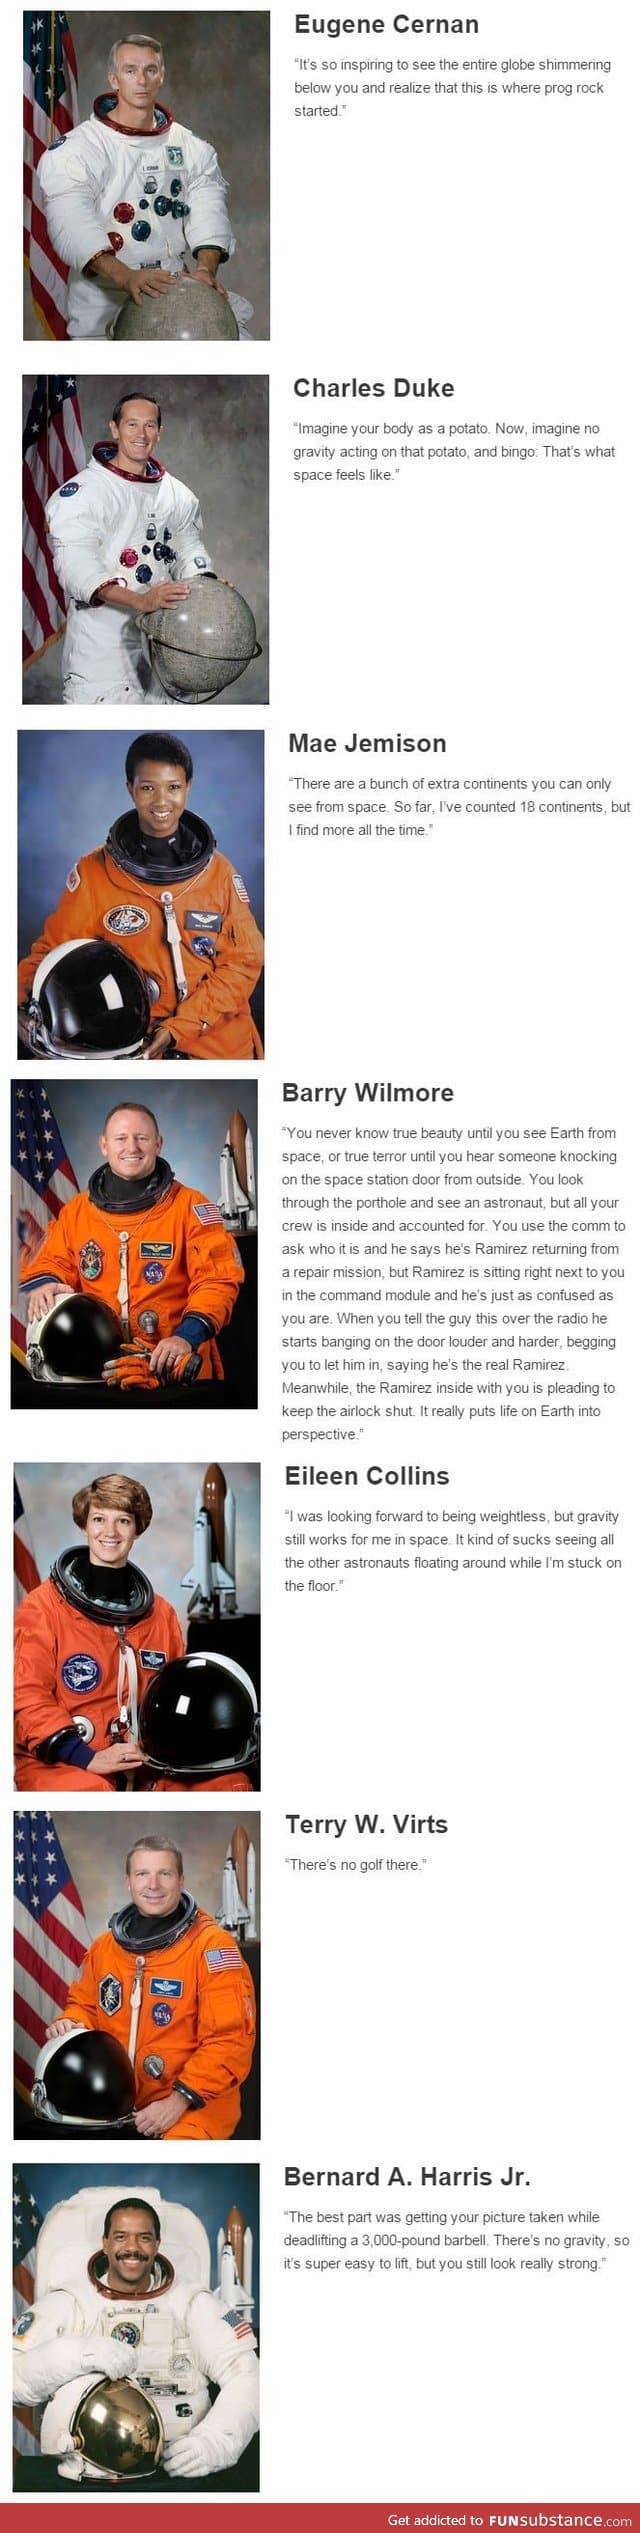 Seven Astronauts describe what it feels like to be in space